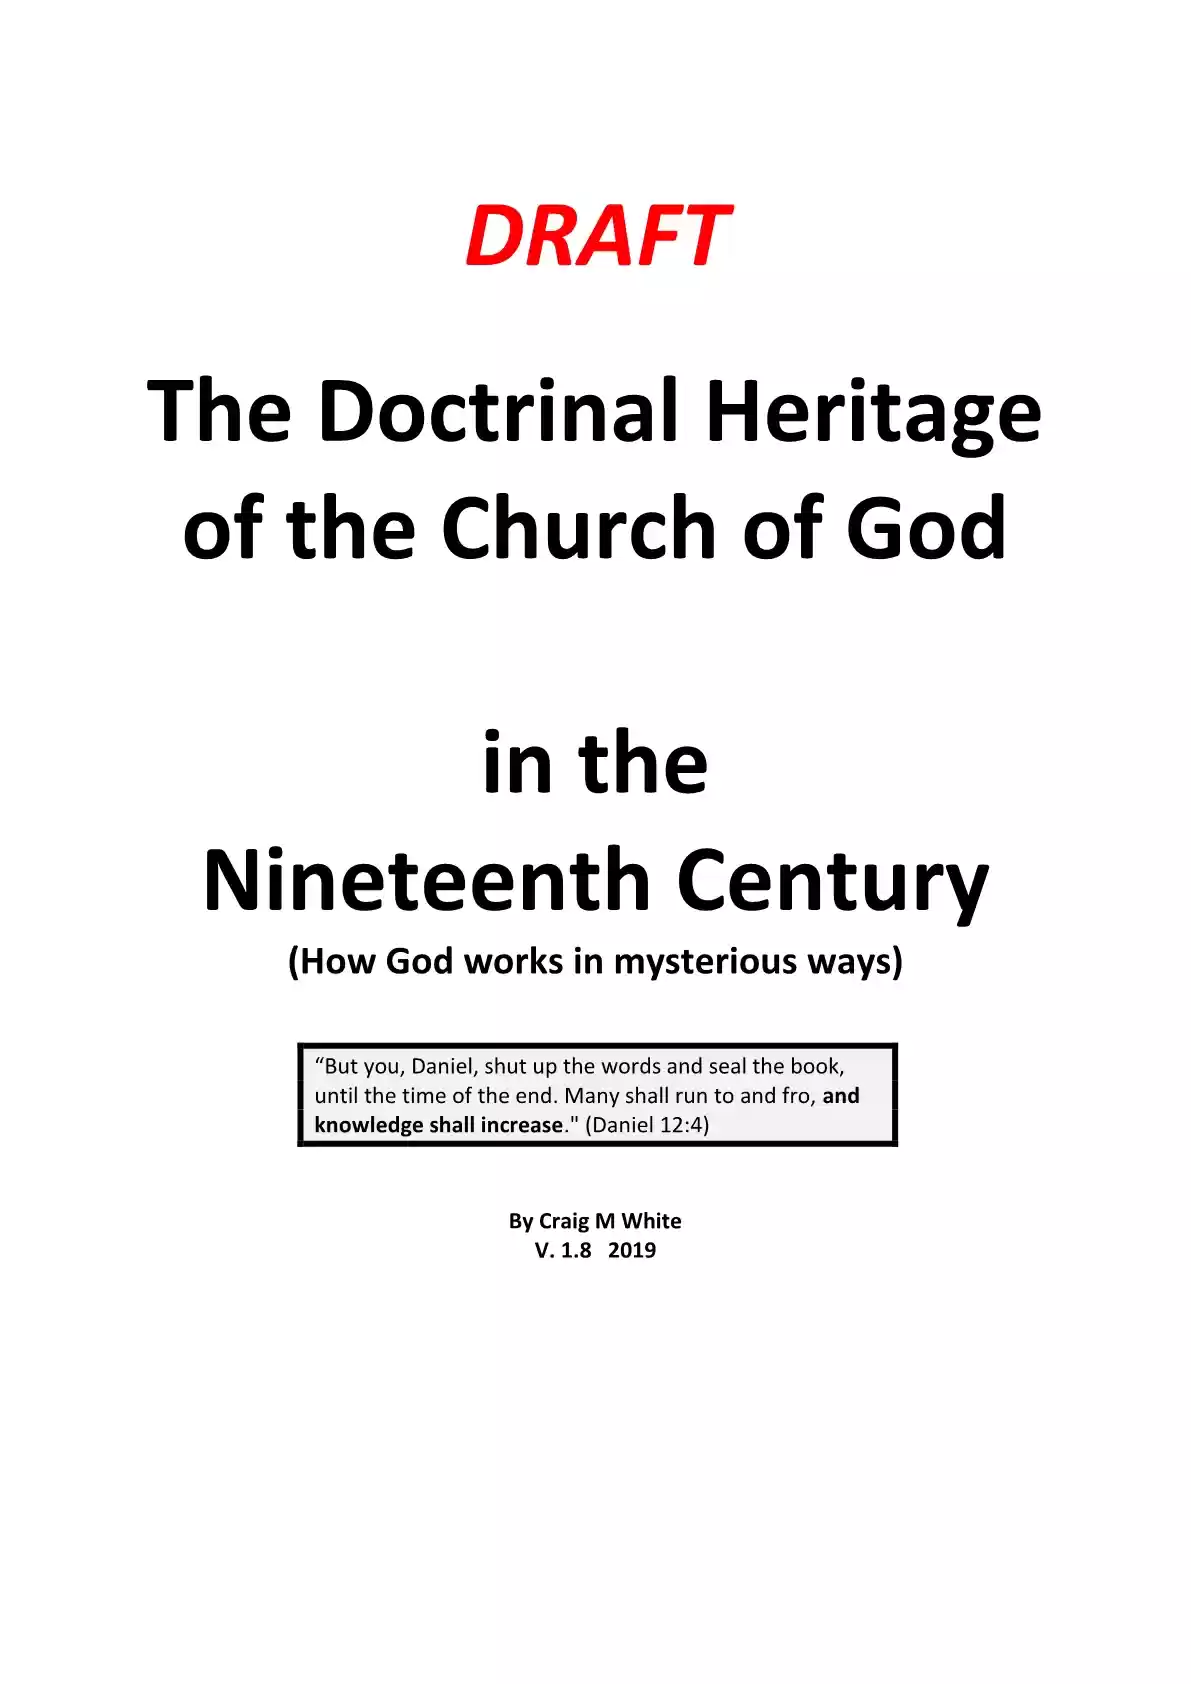 Doctrinal Heritage of the Church of God1